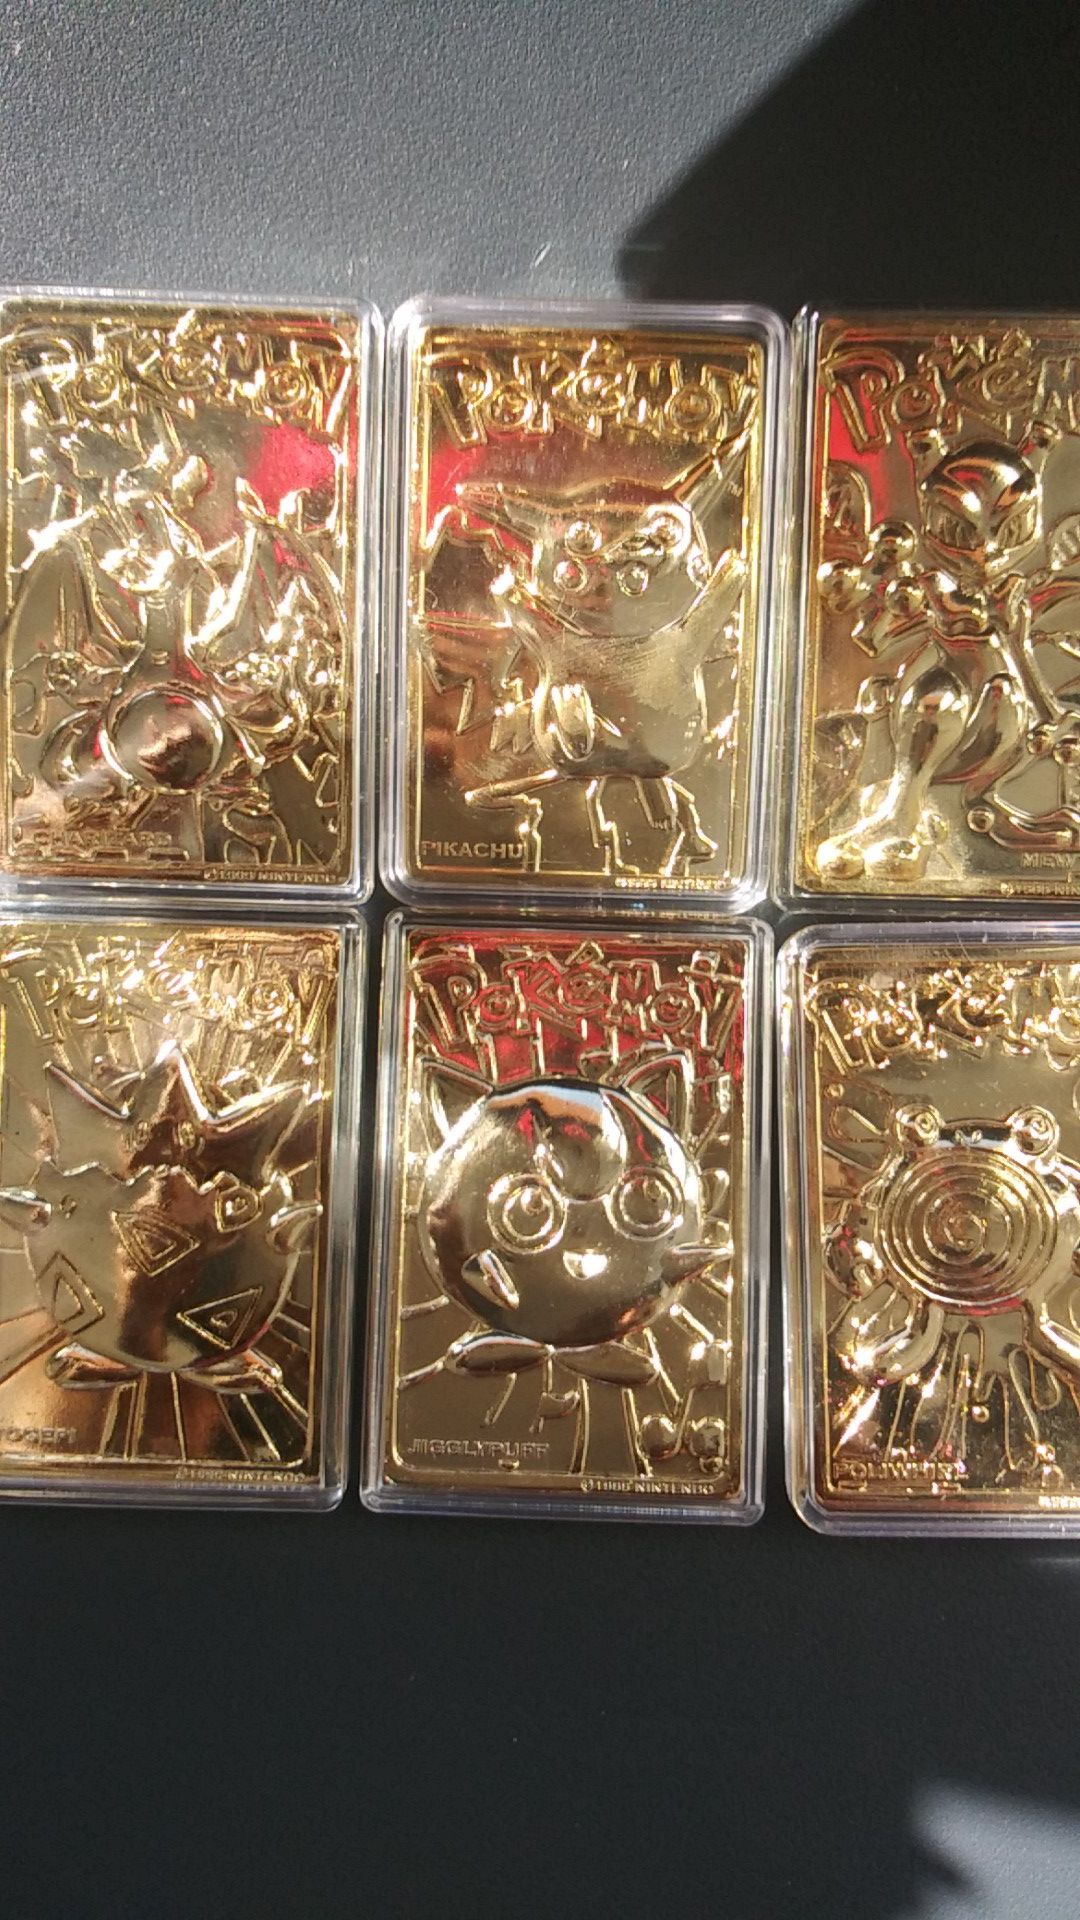 23k Pokemon Gold Plated Trading Cards